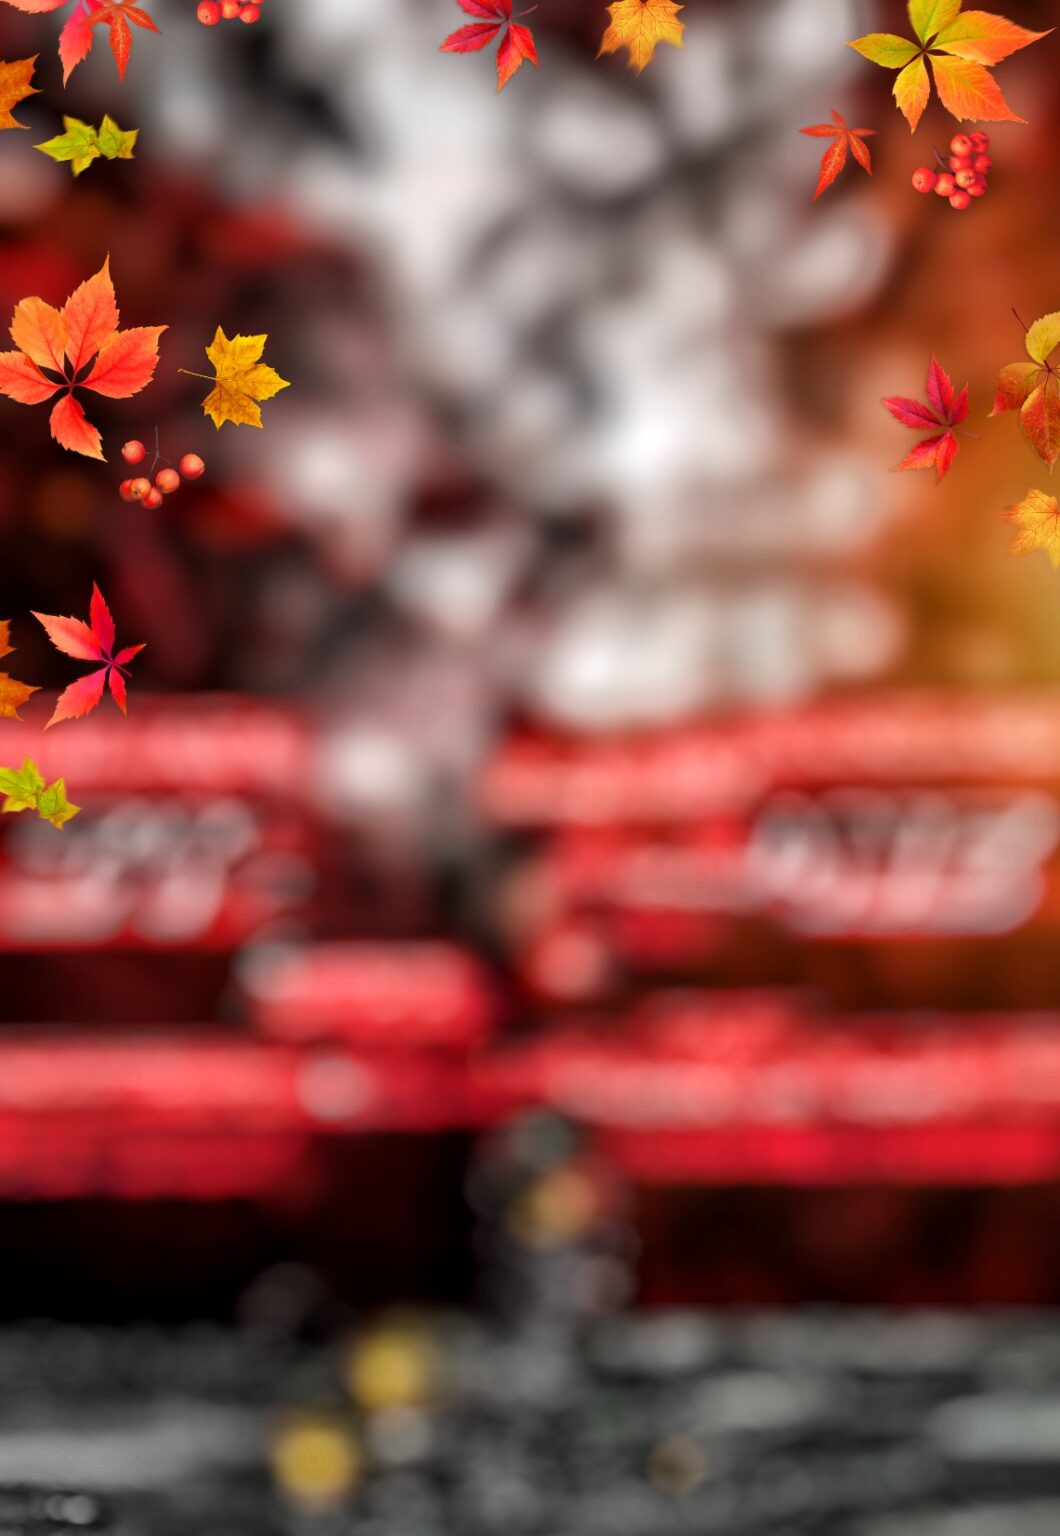 Dark And Autumn CB Editing Background HD Picture